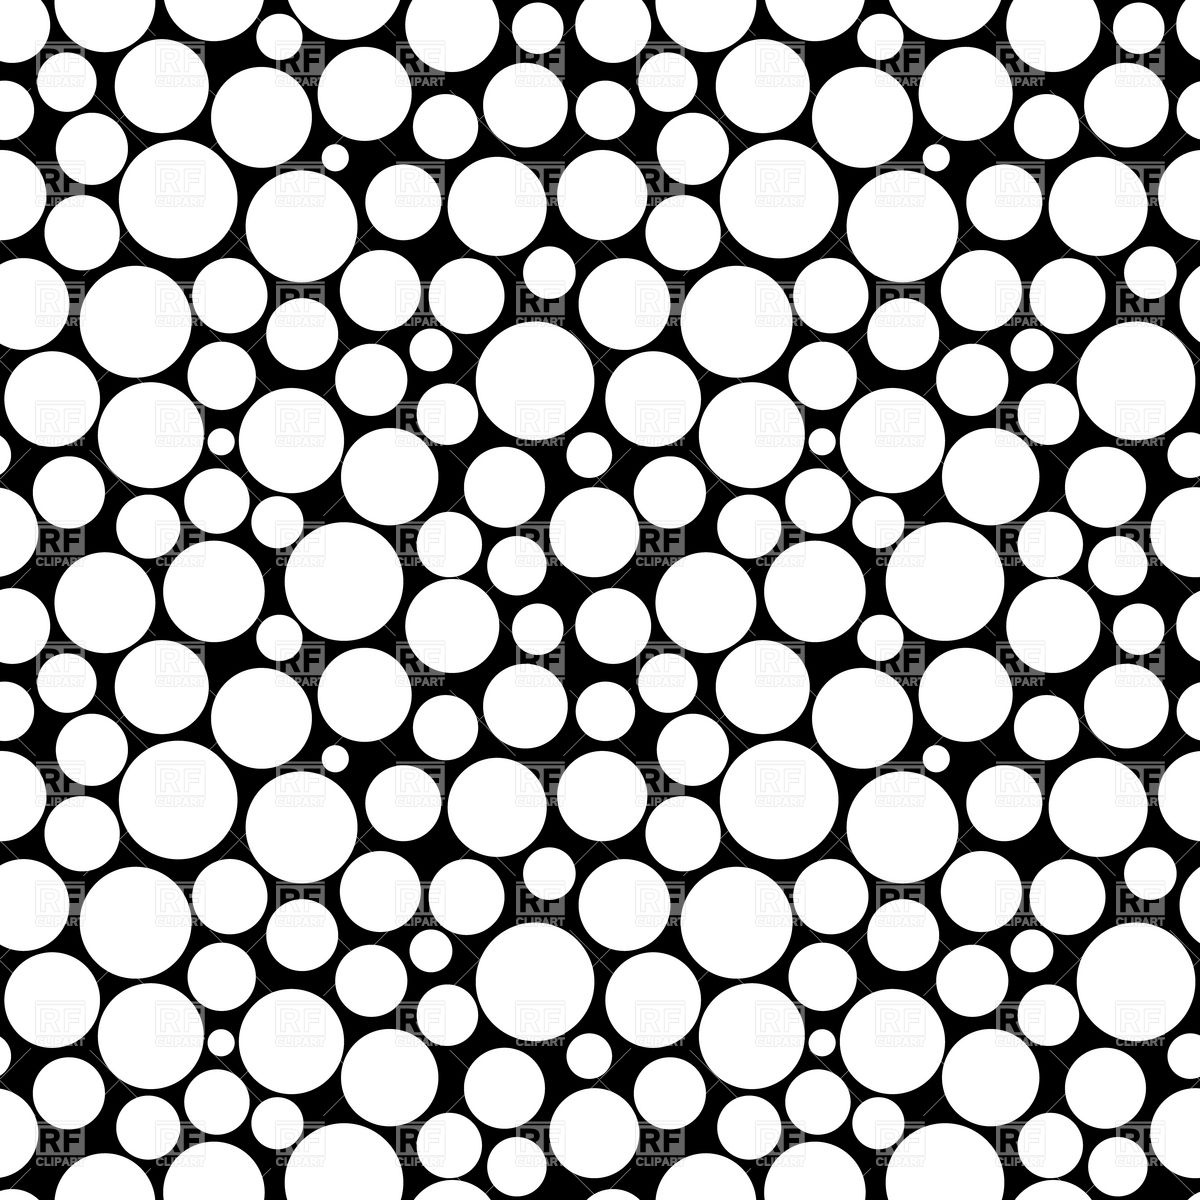 Dot Seamless Background Download Royalty Free Vector Clipart  Eps